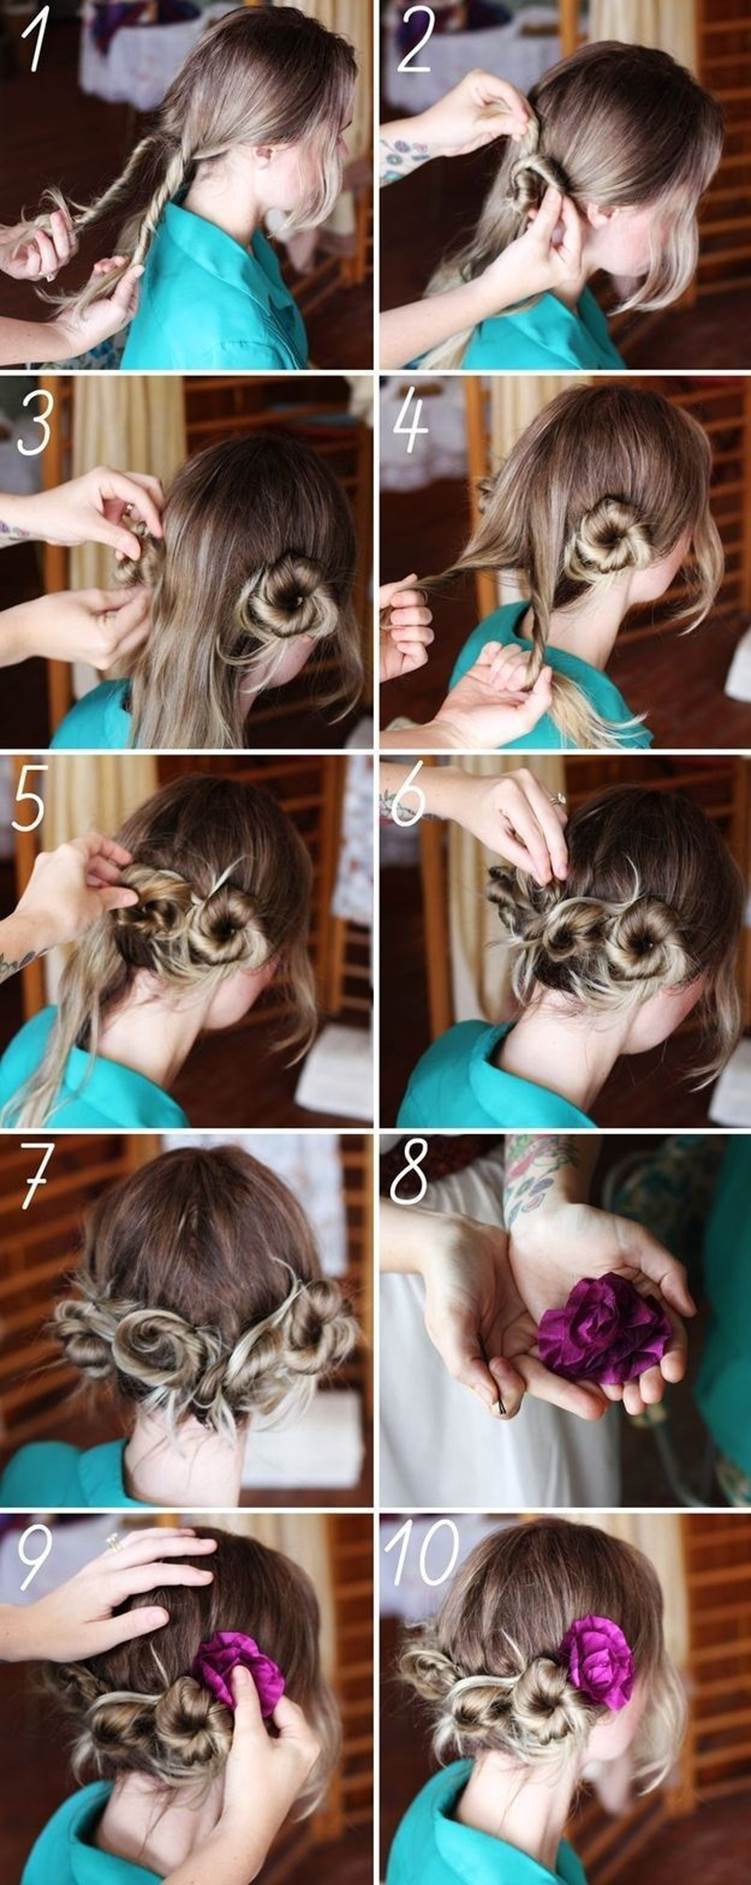 Cool DIY hairstyles for girls18 Cool DIY hairstyles for girls